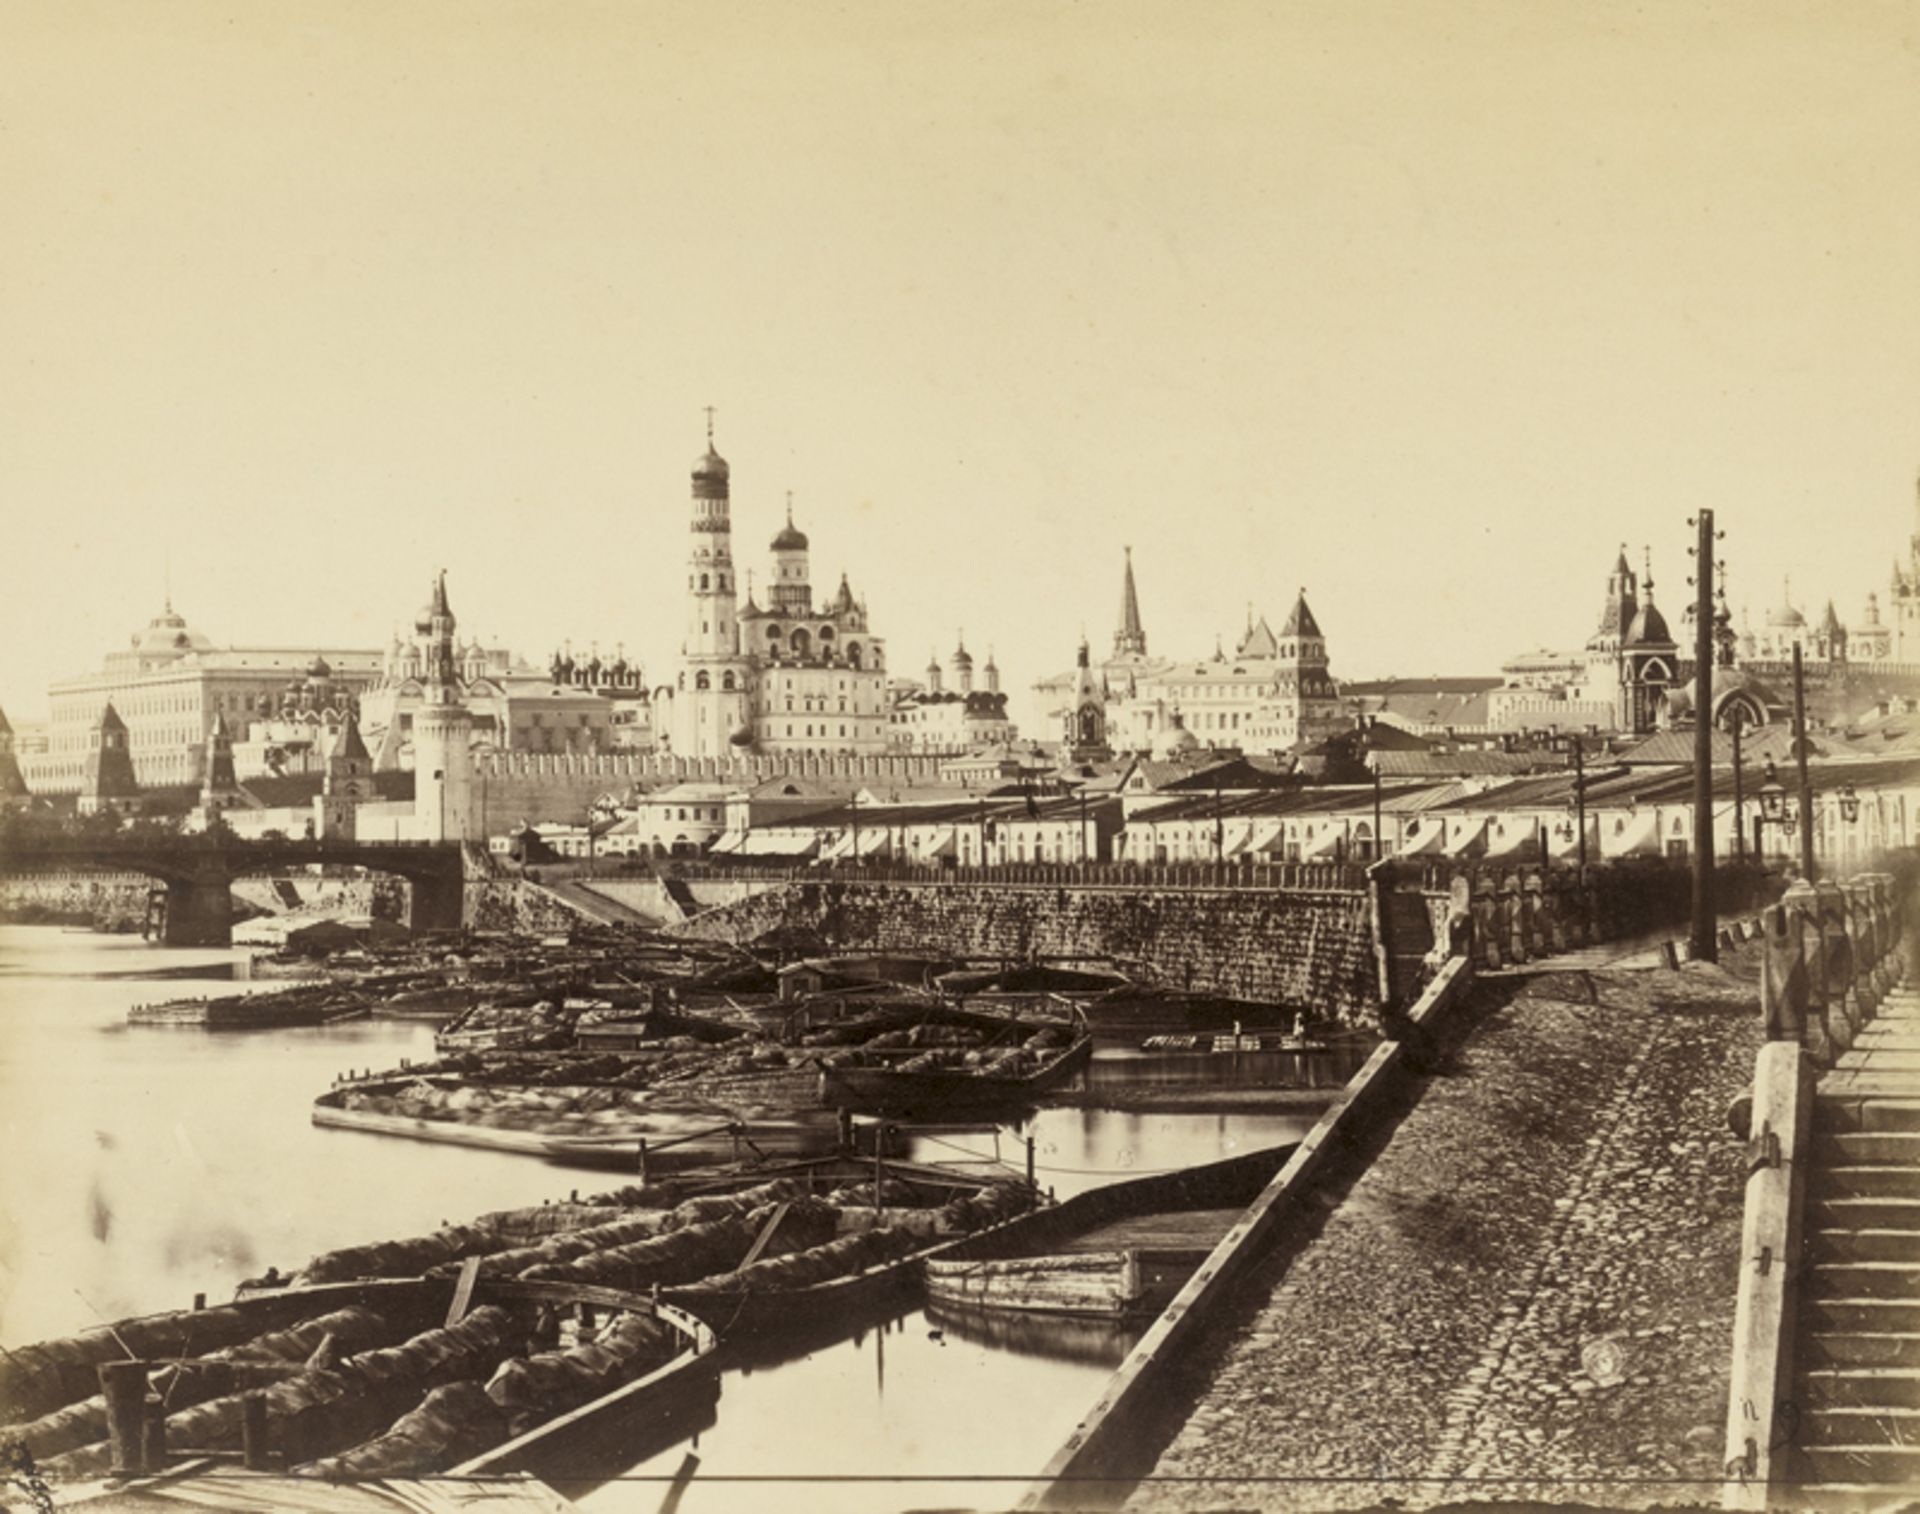 Moscow: Views of Moscow and surroundings - Image 2 of 2